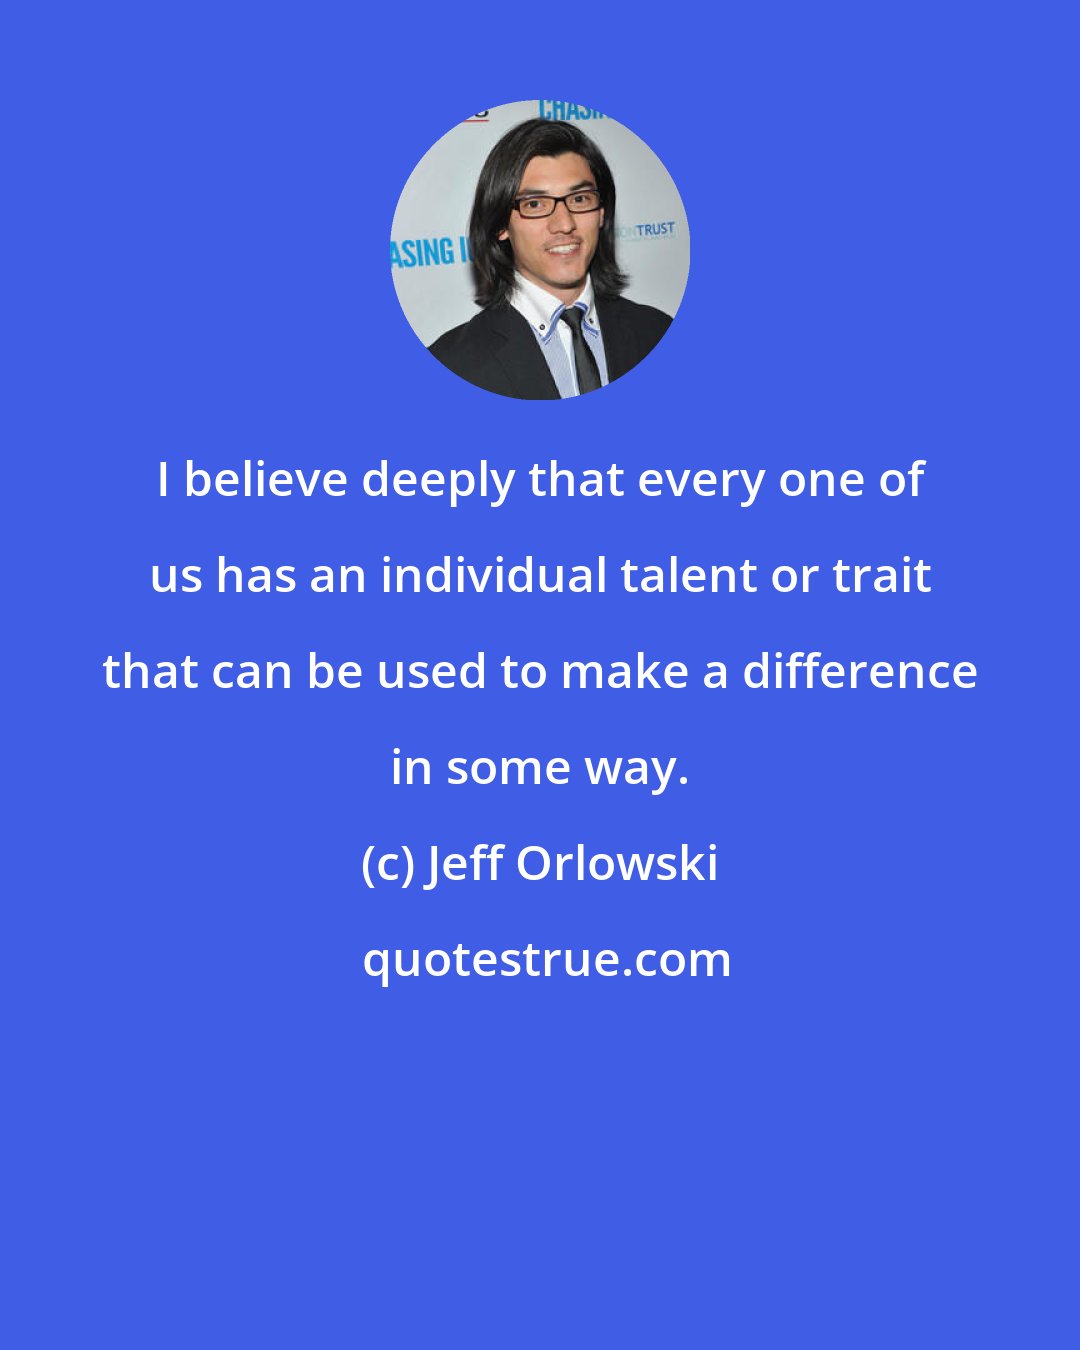 Jeff Orlowski: I believe deeply that every one of us has an individual talent or trait that can be used to make a difference in some way.